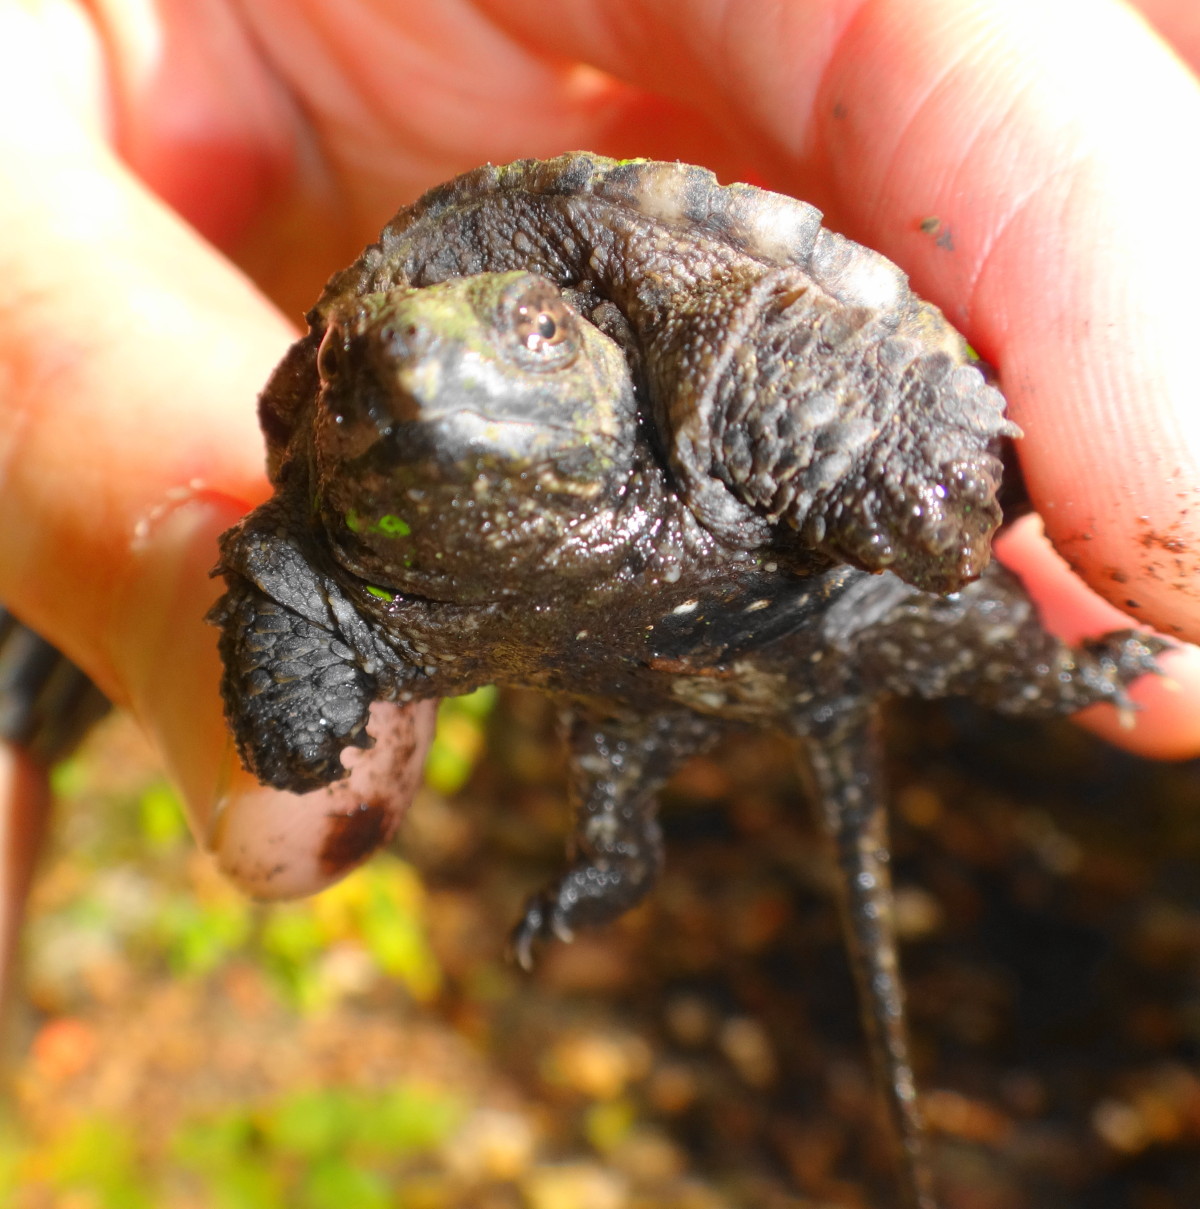 A hand holding a baby snapping turtle